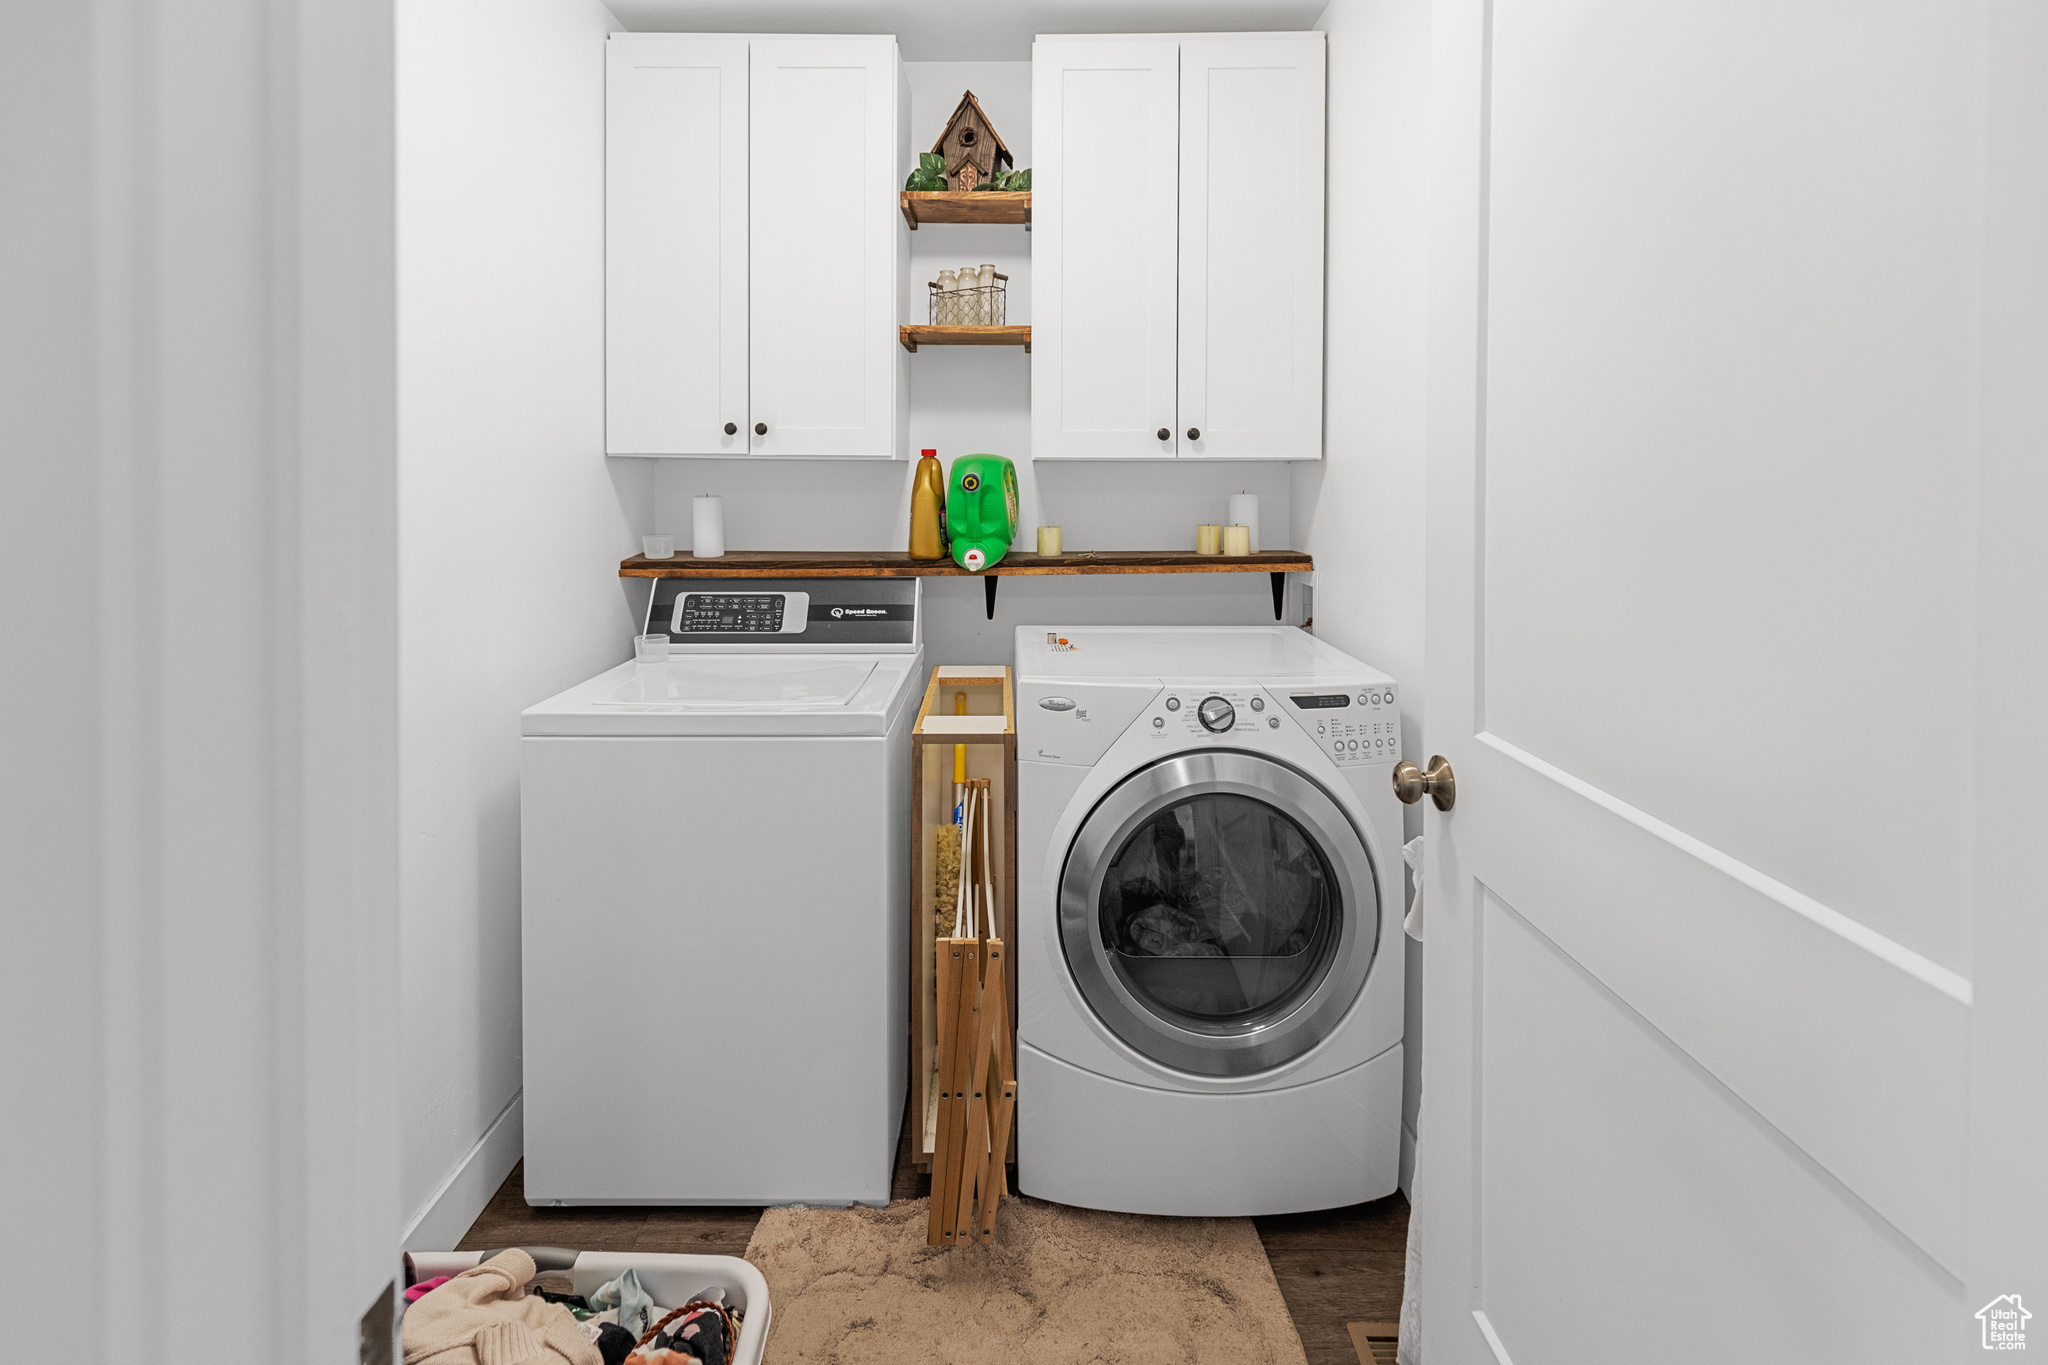 Laundry room featuring dark hardwood / wood-style floors, cabinets, and washer and clothes dryer